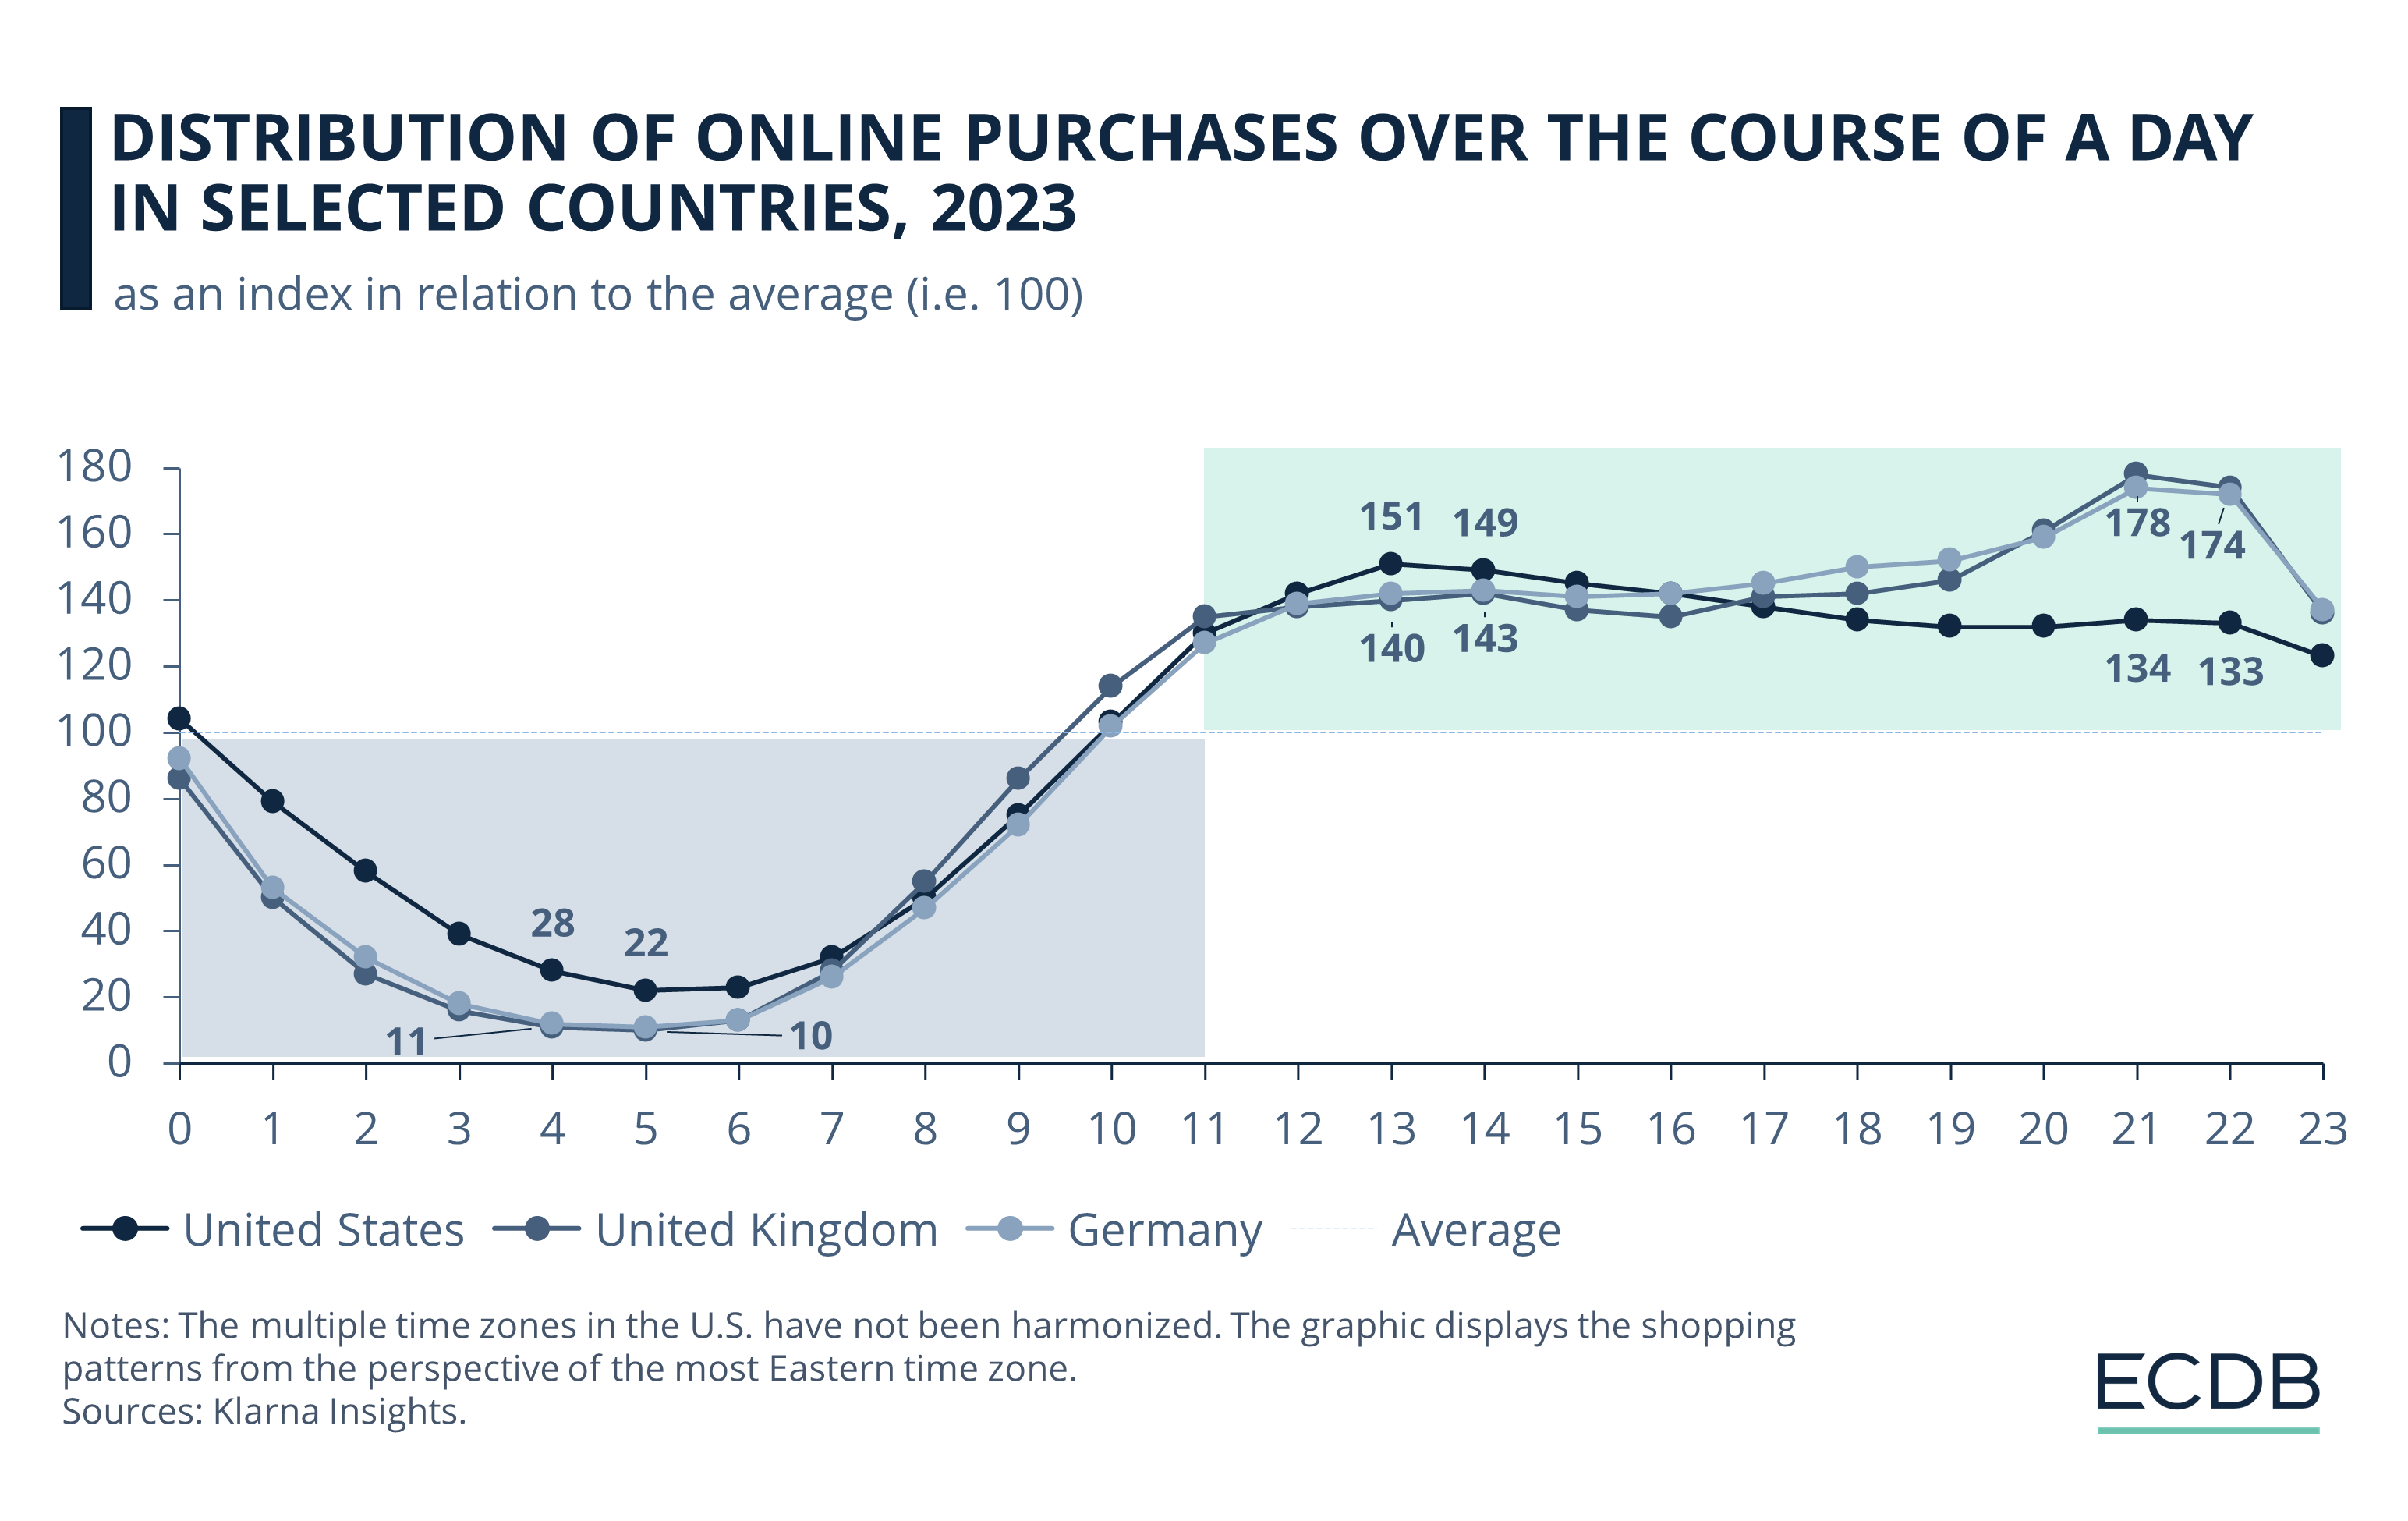 Distribution of Online Purchases Over the Course of a Day in Selected Countries, 2023